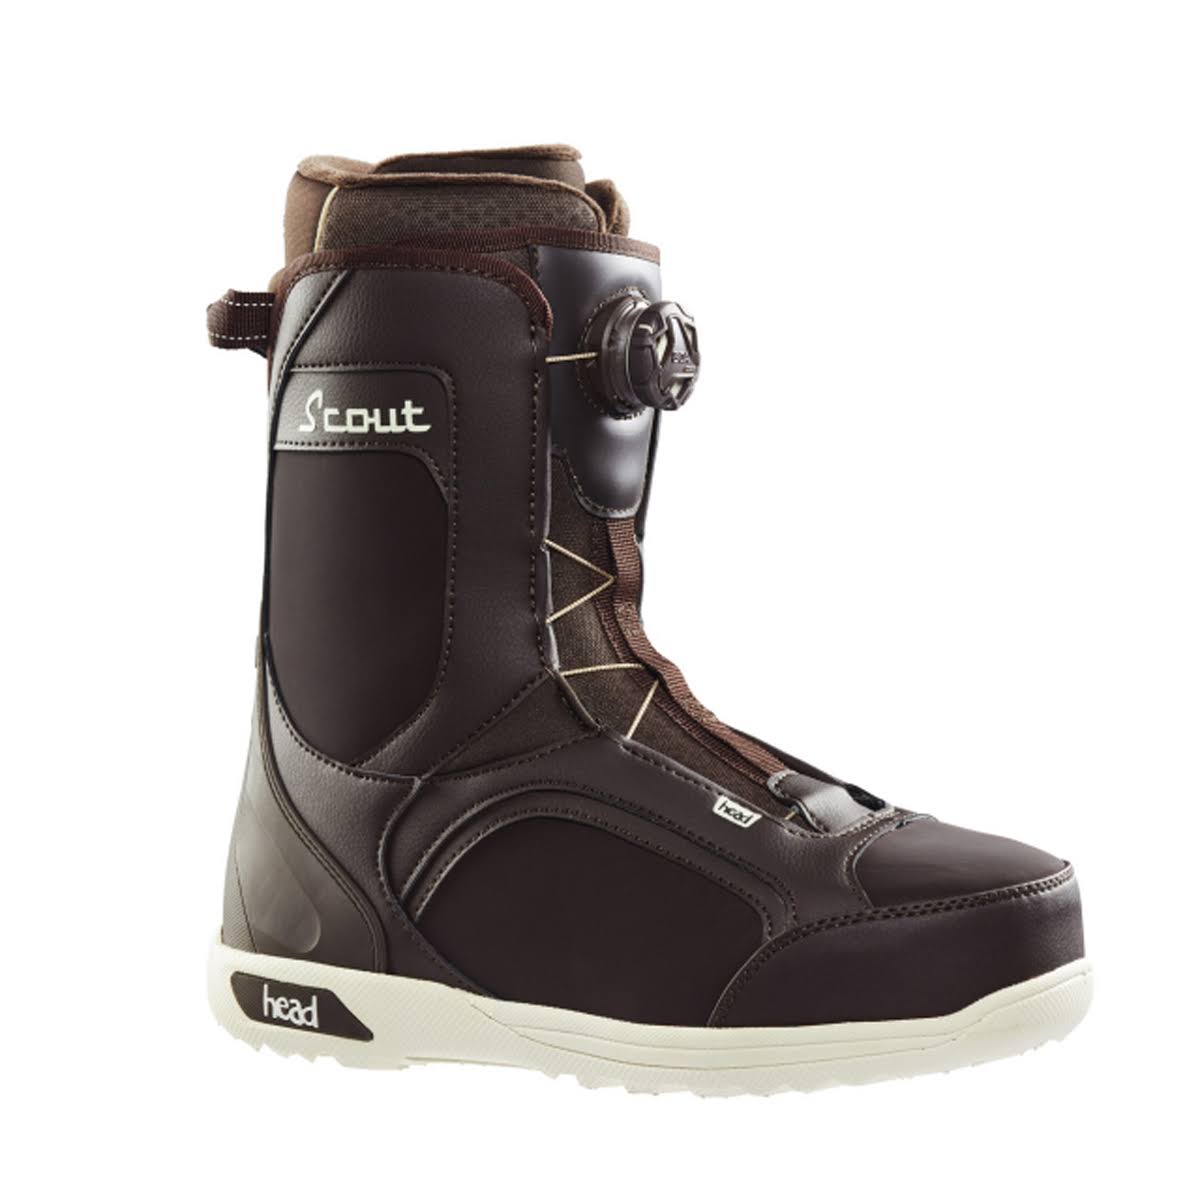 Head Scout Lyt Boa Snowboard Boots 2022